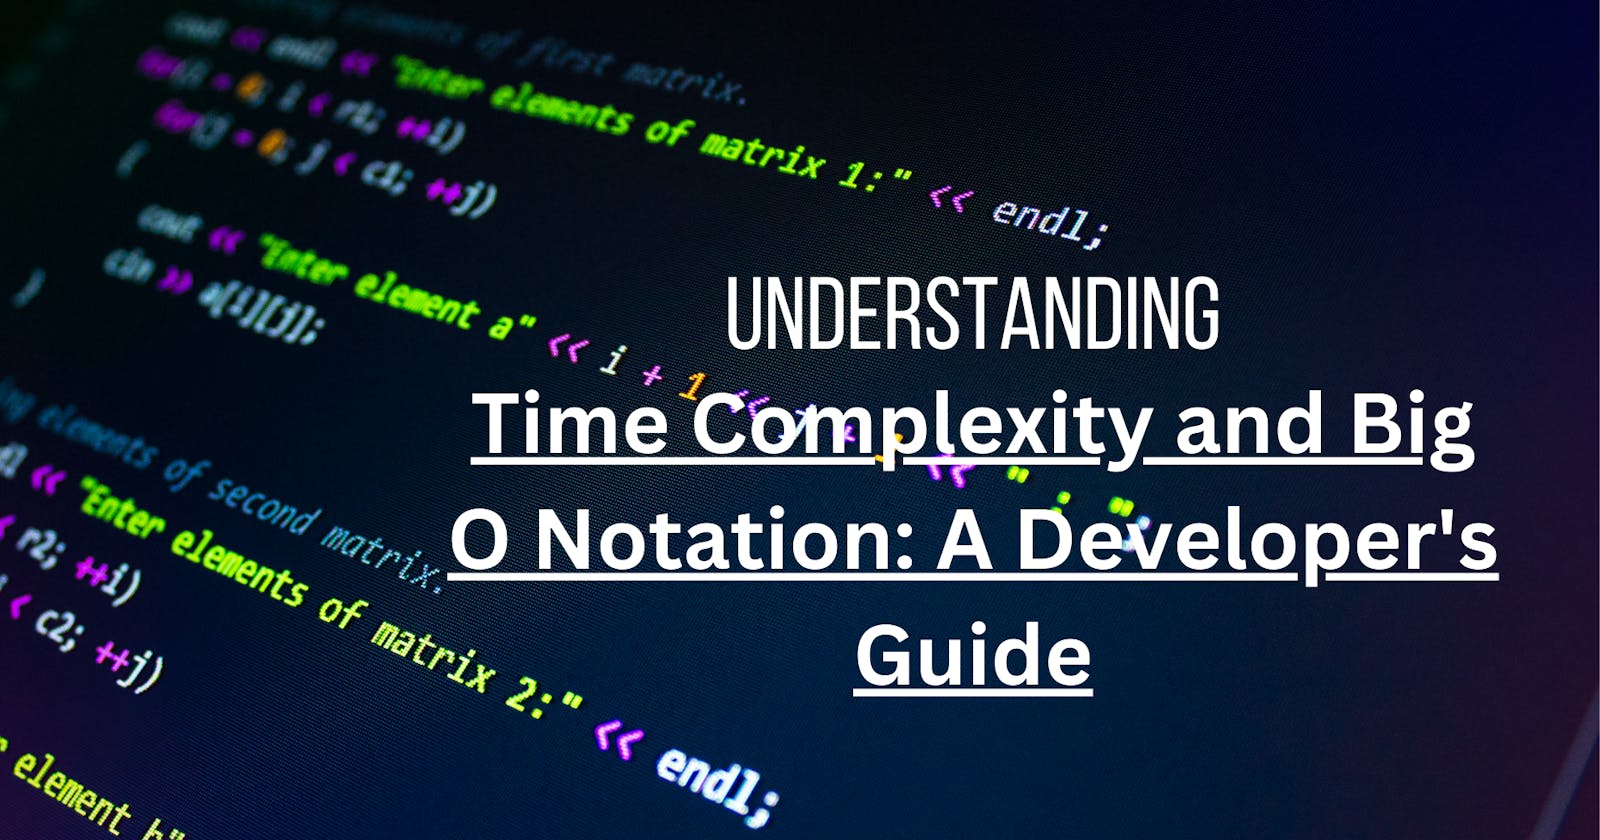 Understanding Time Complexity and Big O Notation: A Developer's Guide